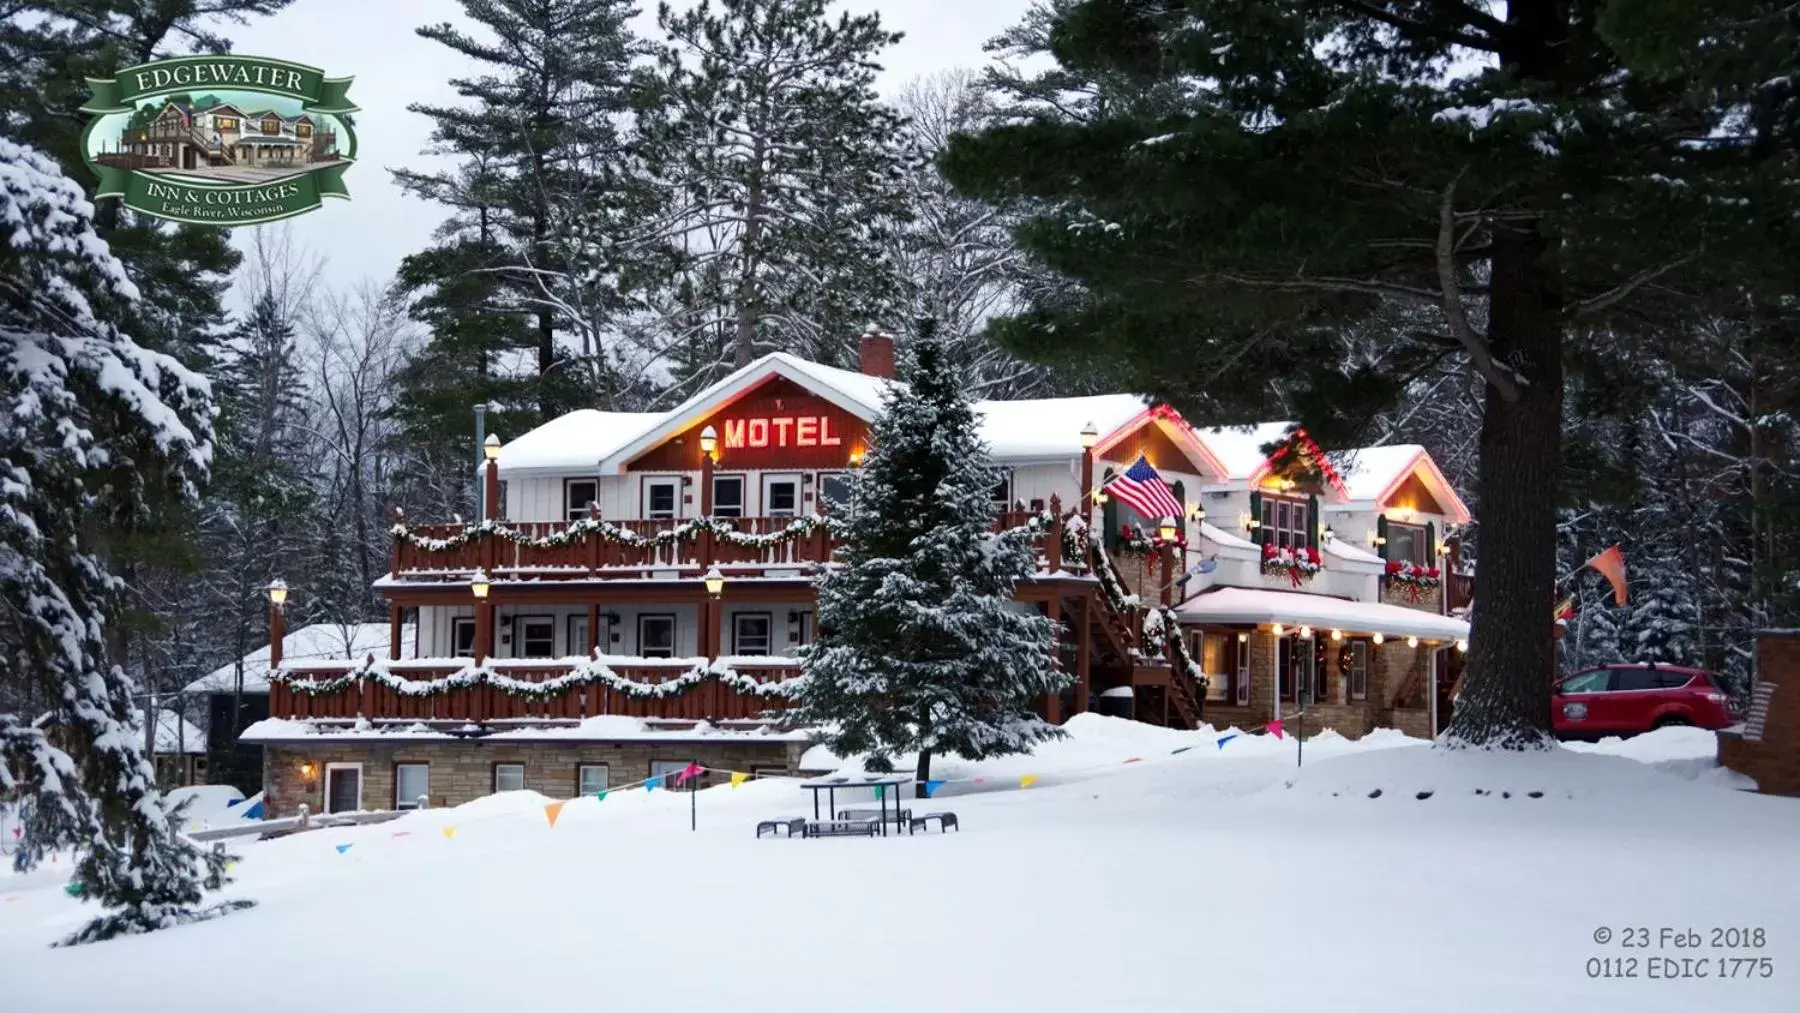 Winter in Edgewater Inn & Cottages